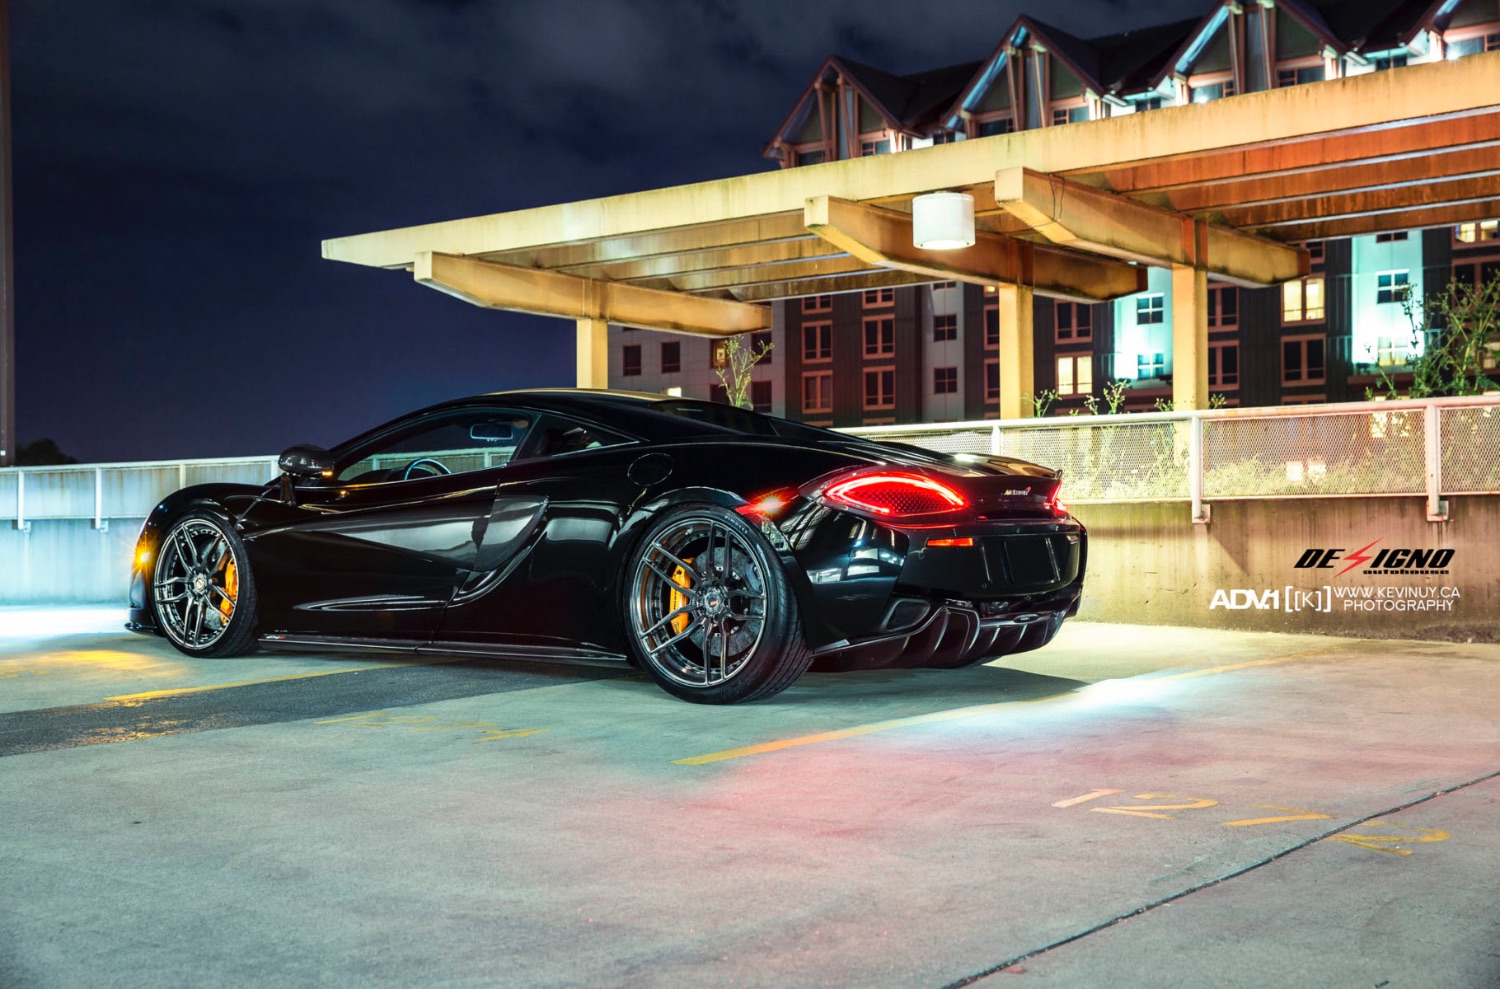 mclaren-570s-luxury-super-car-forged-racing-wheels-adv1-rims-aftermarket-I